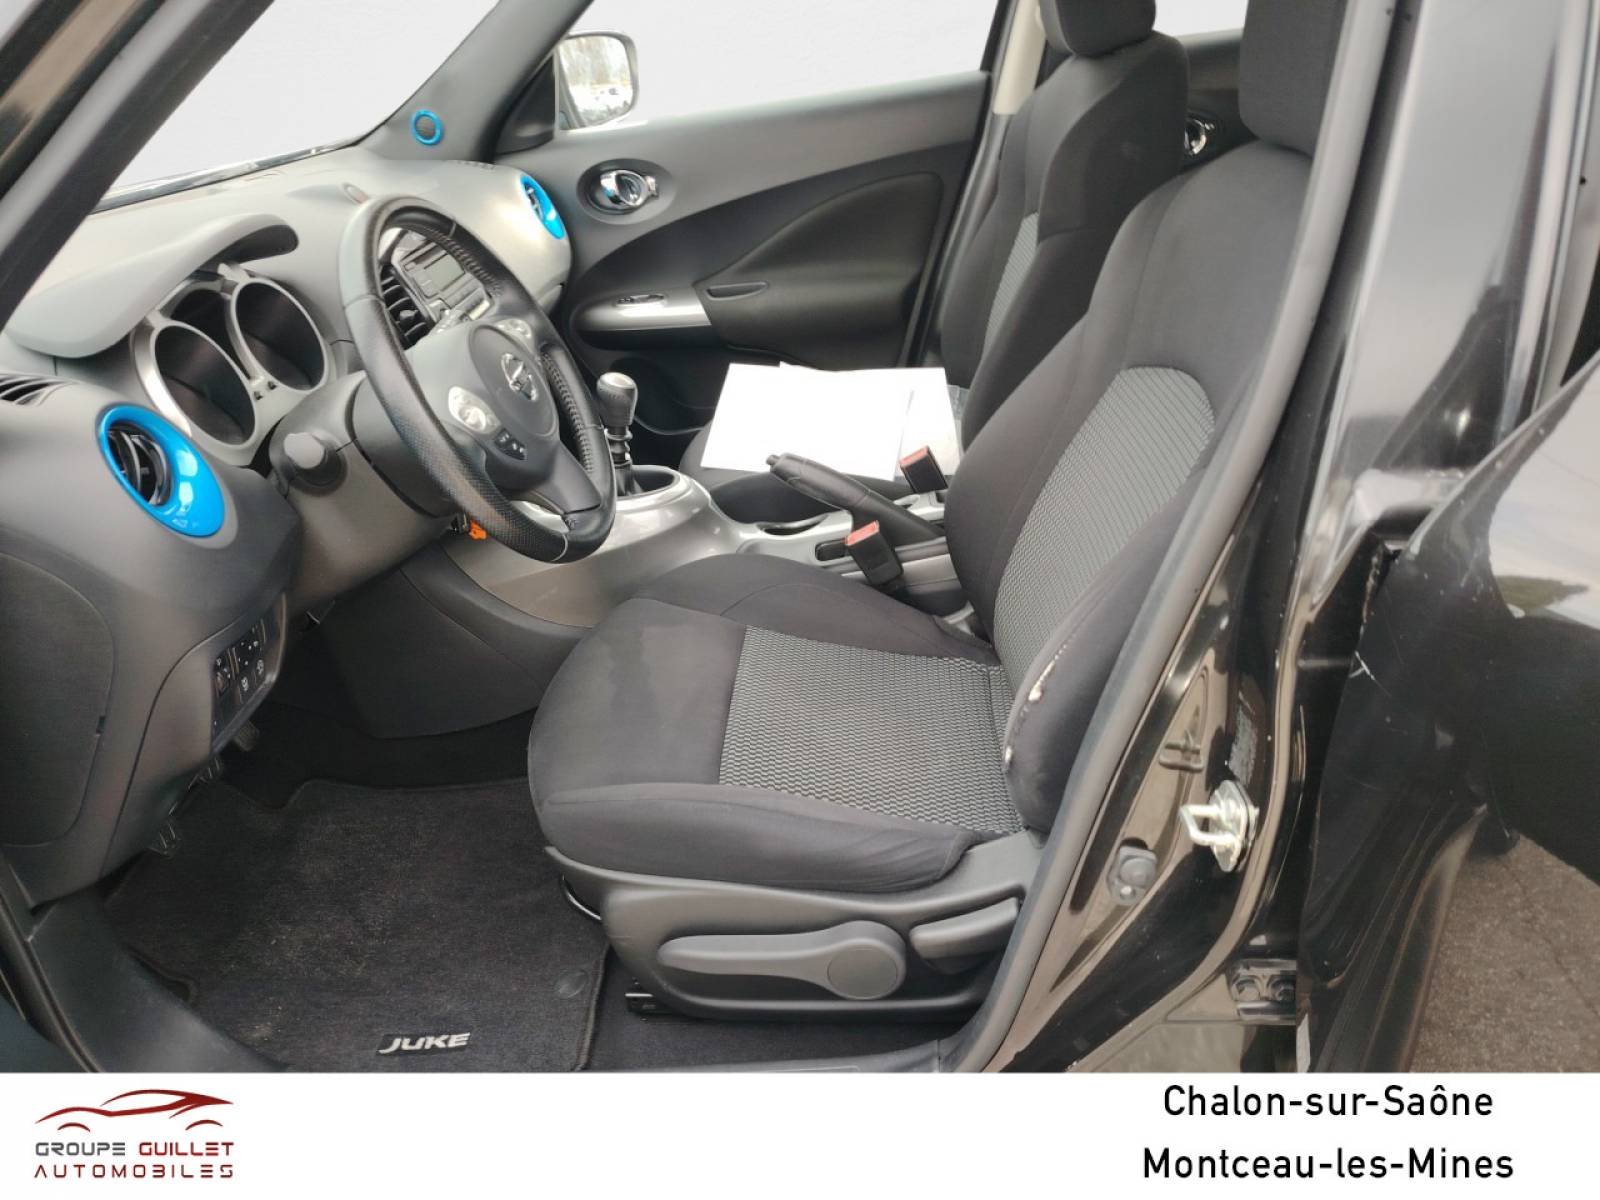 NISSAN Juke 1.2e DIG-T 115 Start/Stop System - véhicule d'occasion - Groupe Guillet - Opel Magicauto Chalon - 71380 - Saint-Marcel - 9